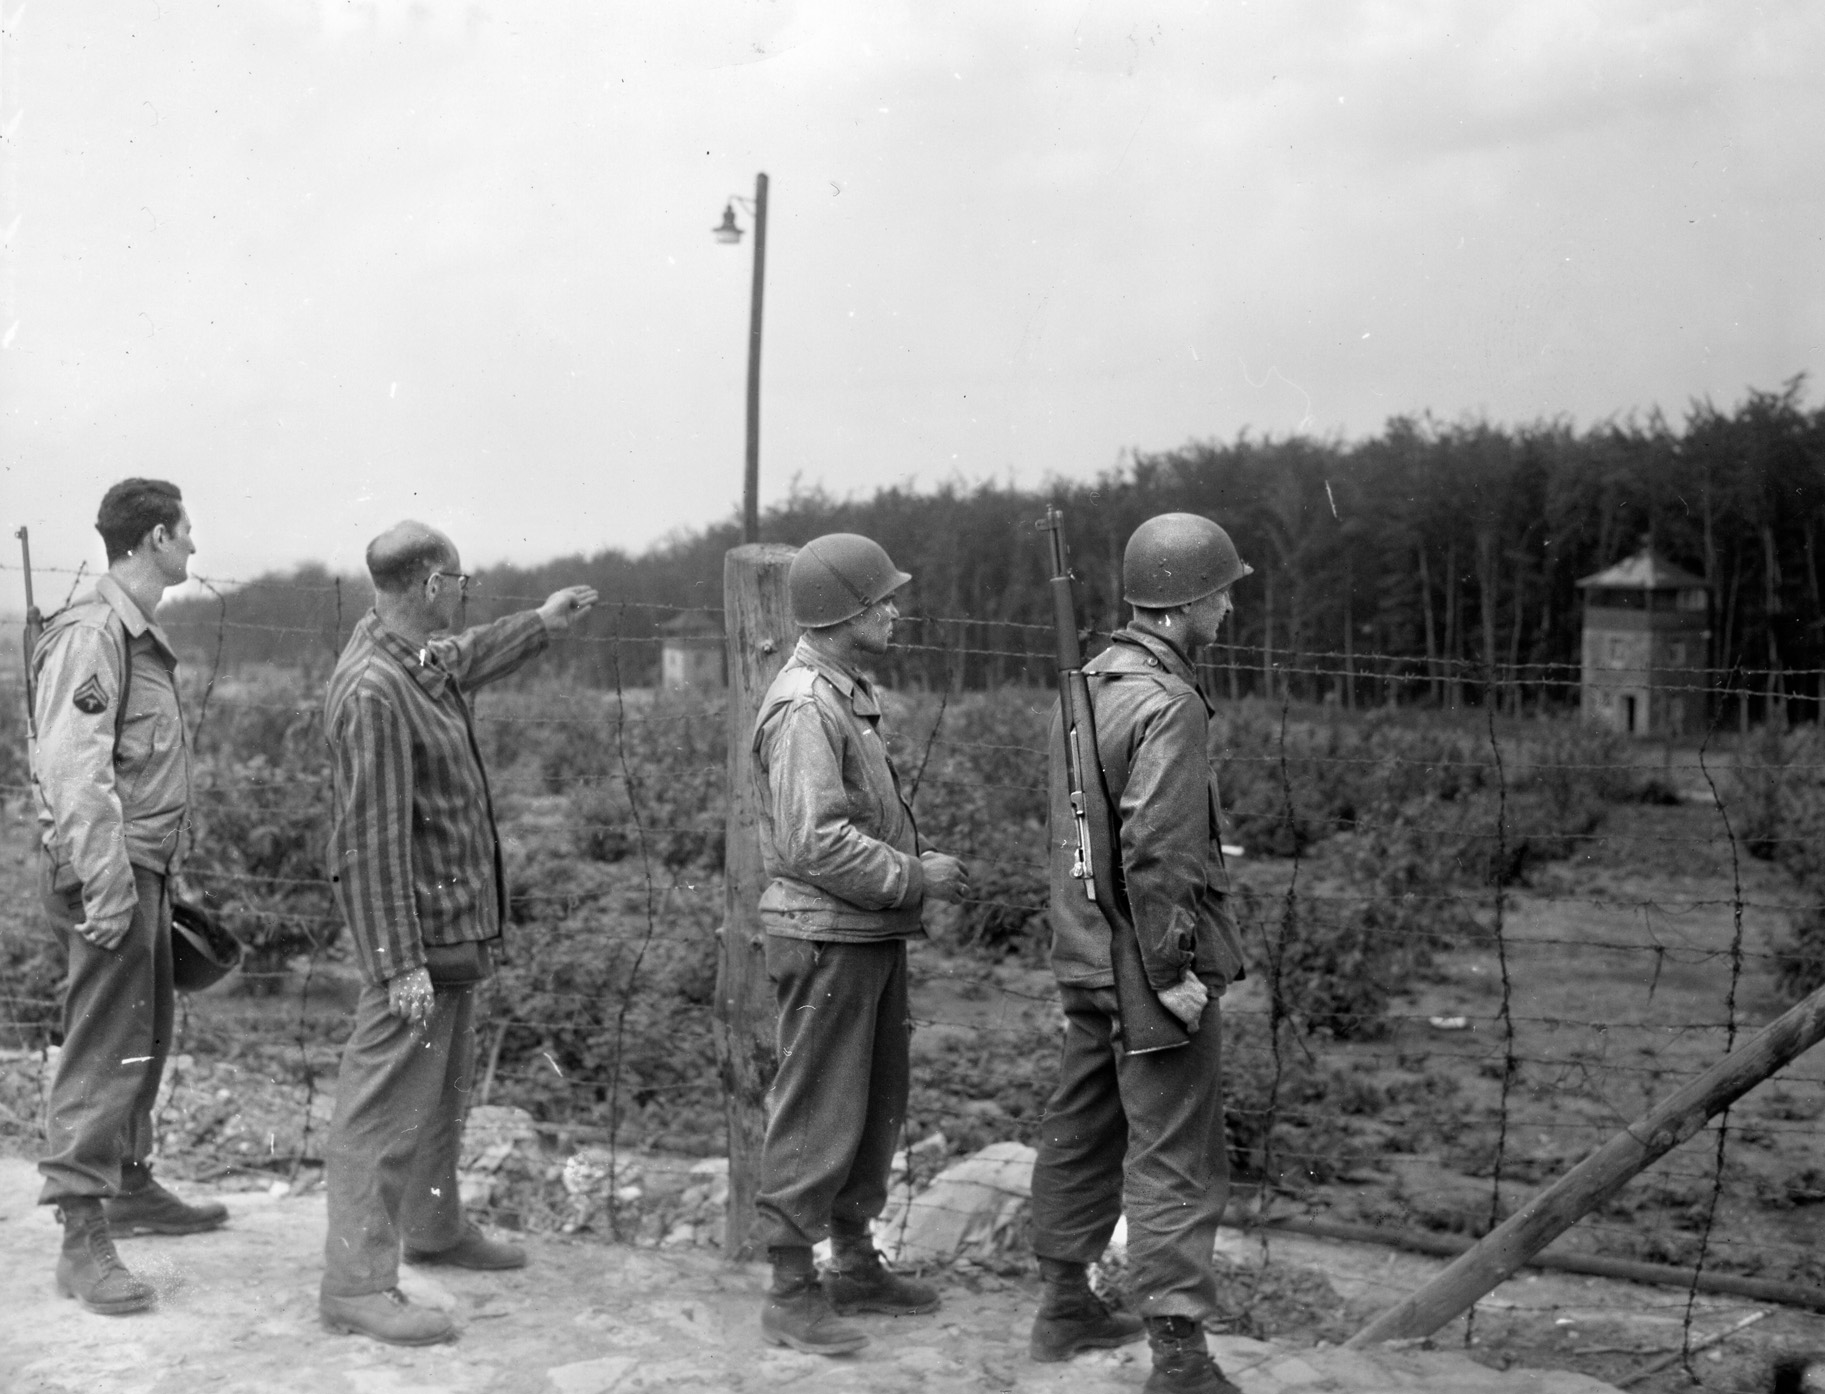 Elements of the U.S. 83rd Infantry Division liberated Langenstein-Zweiberge, a sub-camp of the Buchenwald concentration camp system, on April 11, 1945.